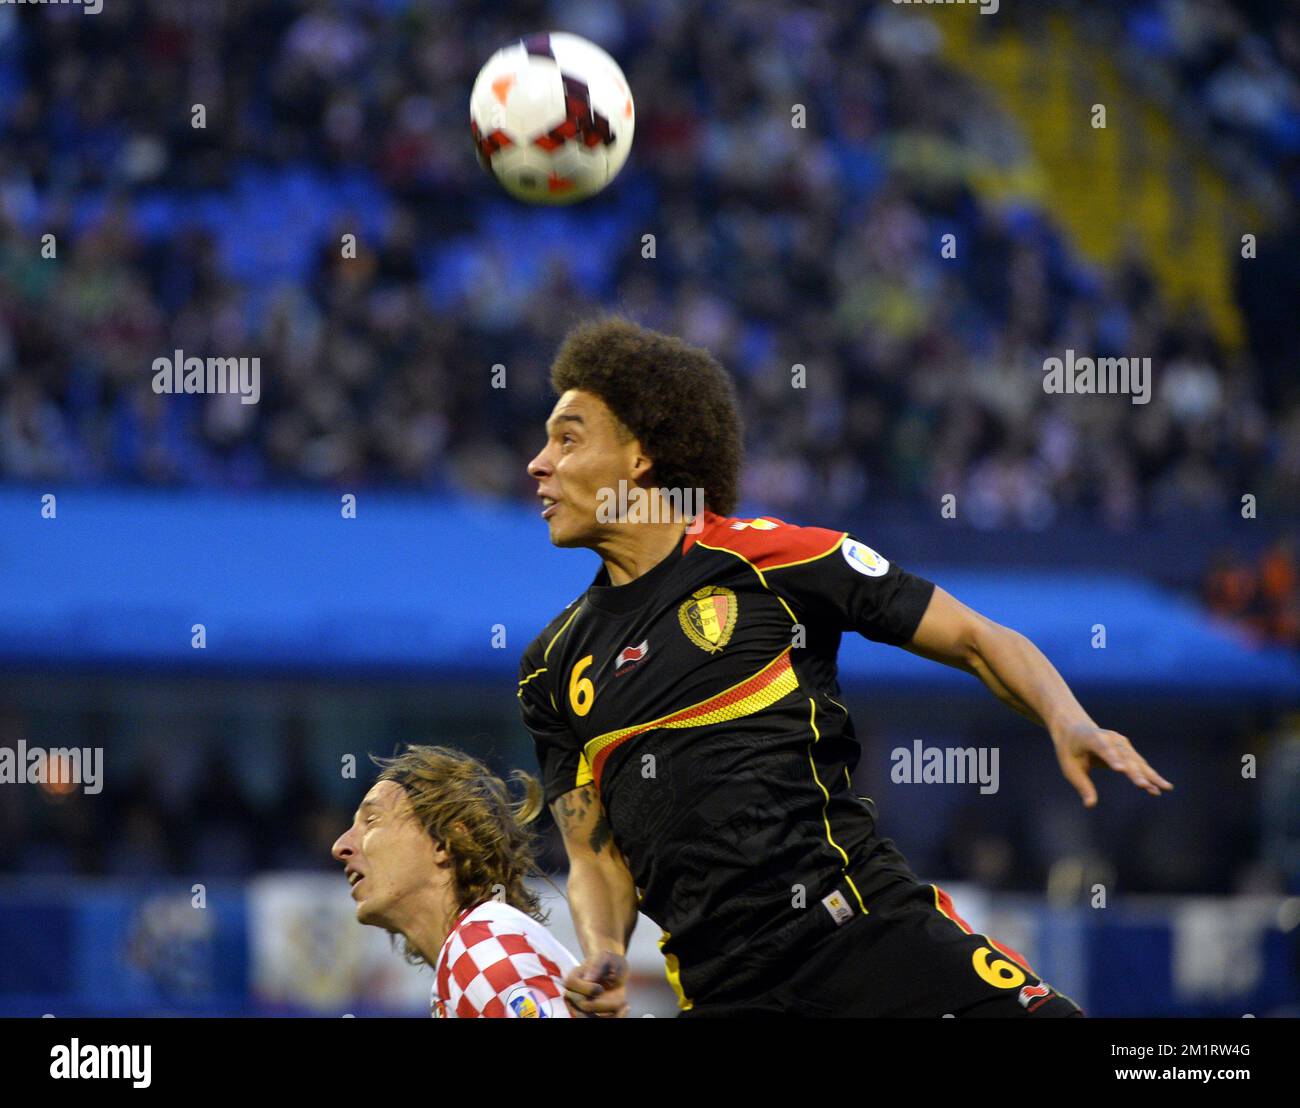 20131011 - ZAGREB, CROATIA: Croatia's Luka Modric and Belgium's Axel Witsel fight for the ball during a soccer game between Belgian national team The Red Devils and the Croatian national team in the Maksimir stadium in Zagreb, Croatia, Friday 11 October 2013, a qualification game for the 2014 FIFA World Cup. With two games to play the Red Devils are leading group A, they need one more point to qualify for the World Cup as group winner.   BELGA PHOTO ERIC LALMAND Stock Photo